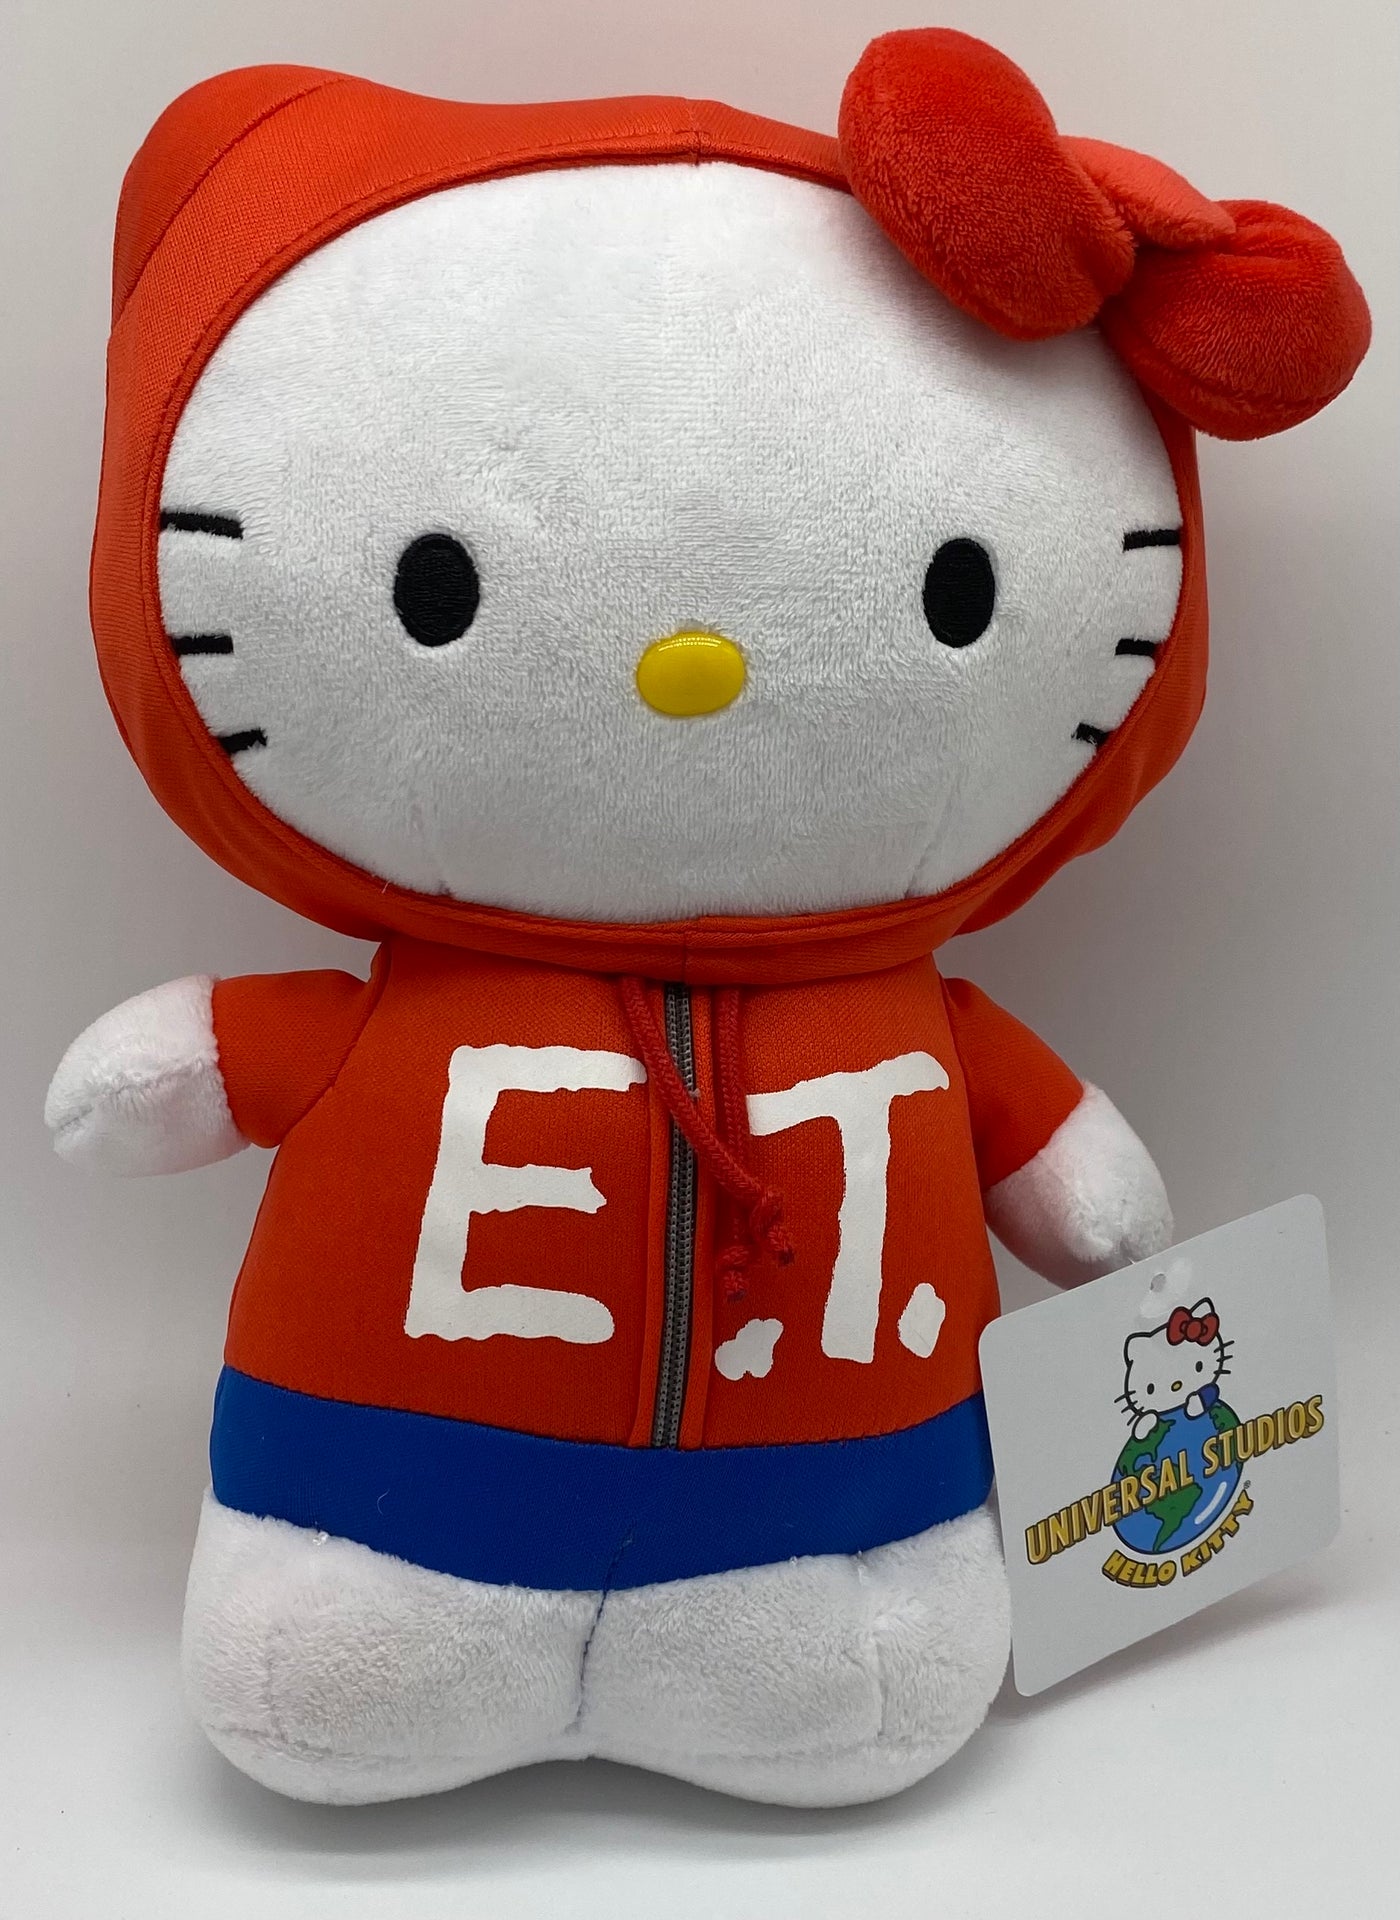 Universal Studios Hello Kitty in E.T. Costume Plush New with Tag